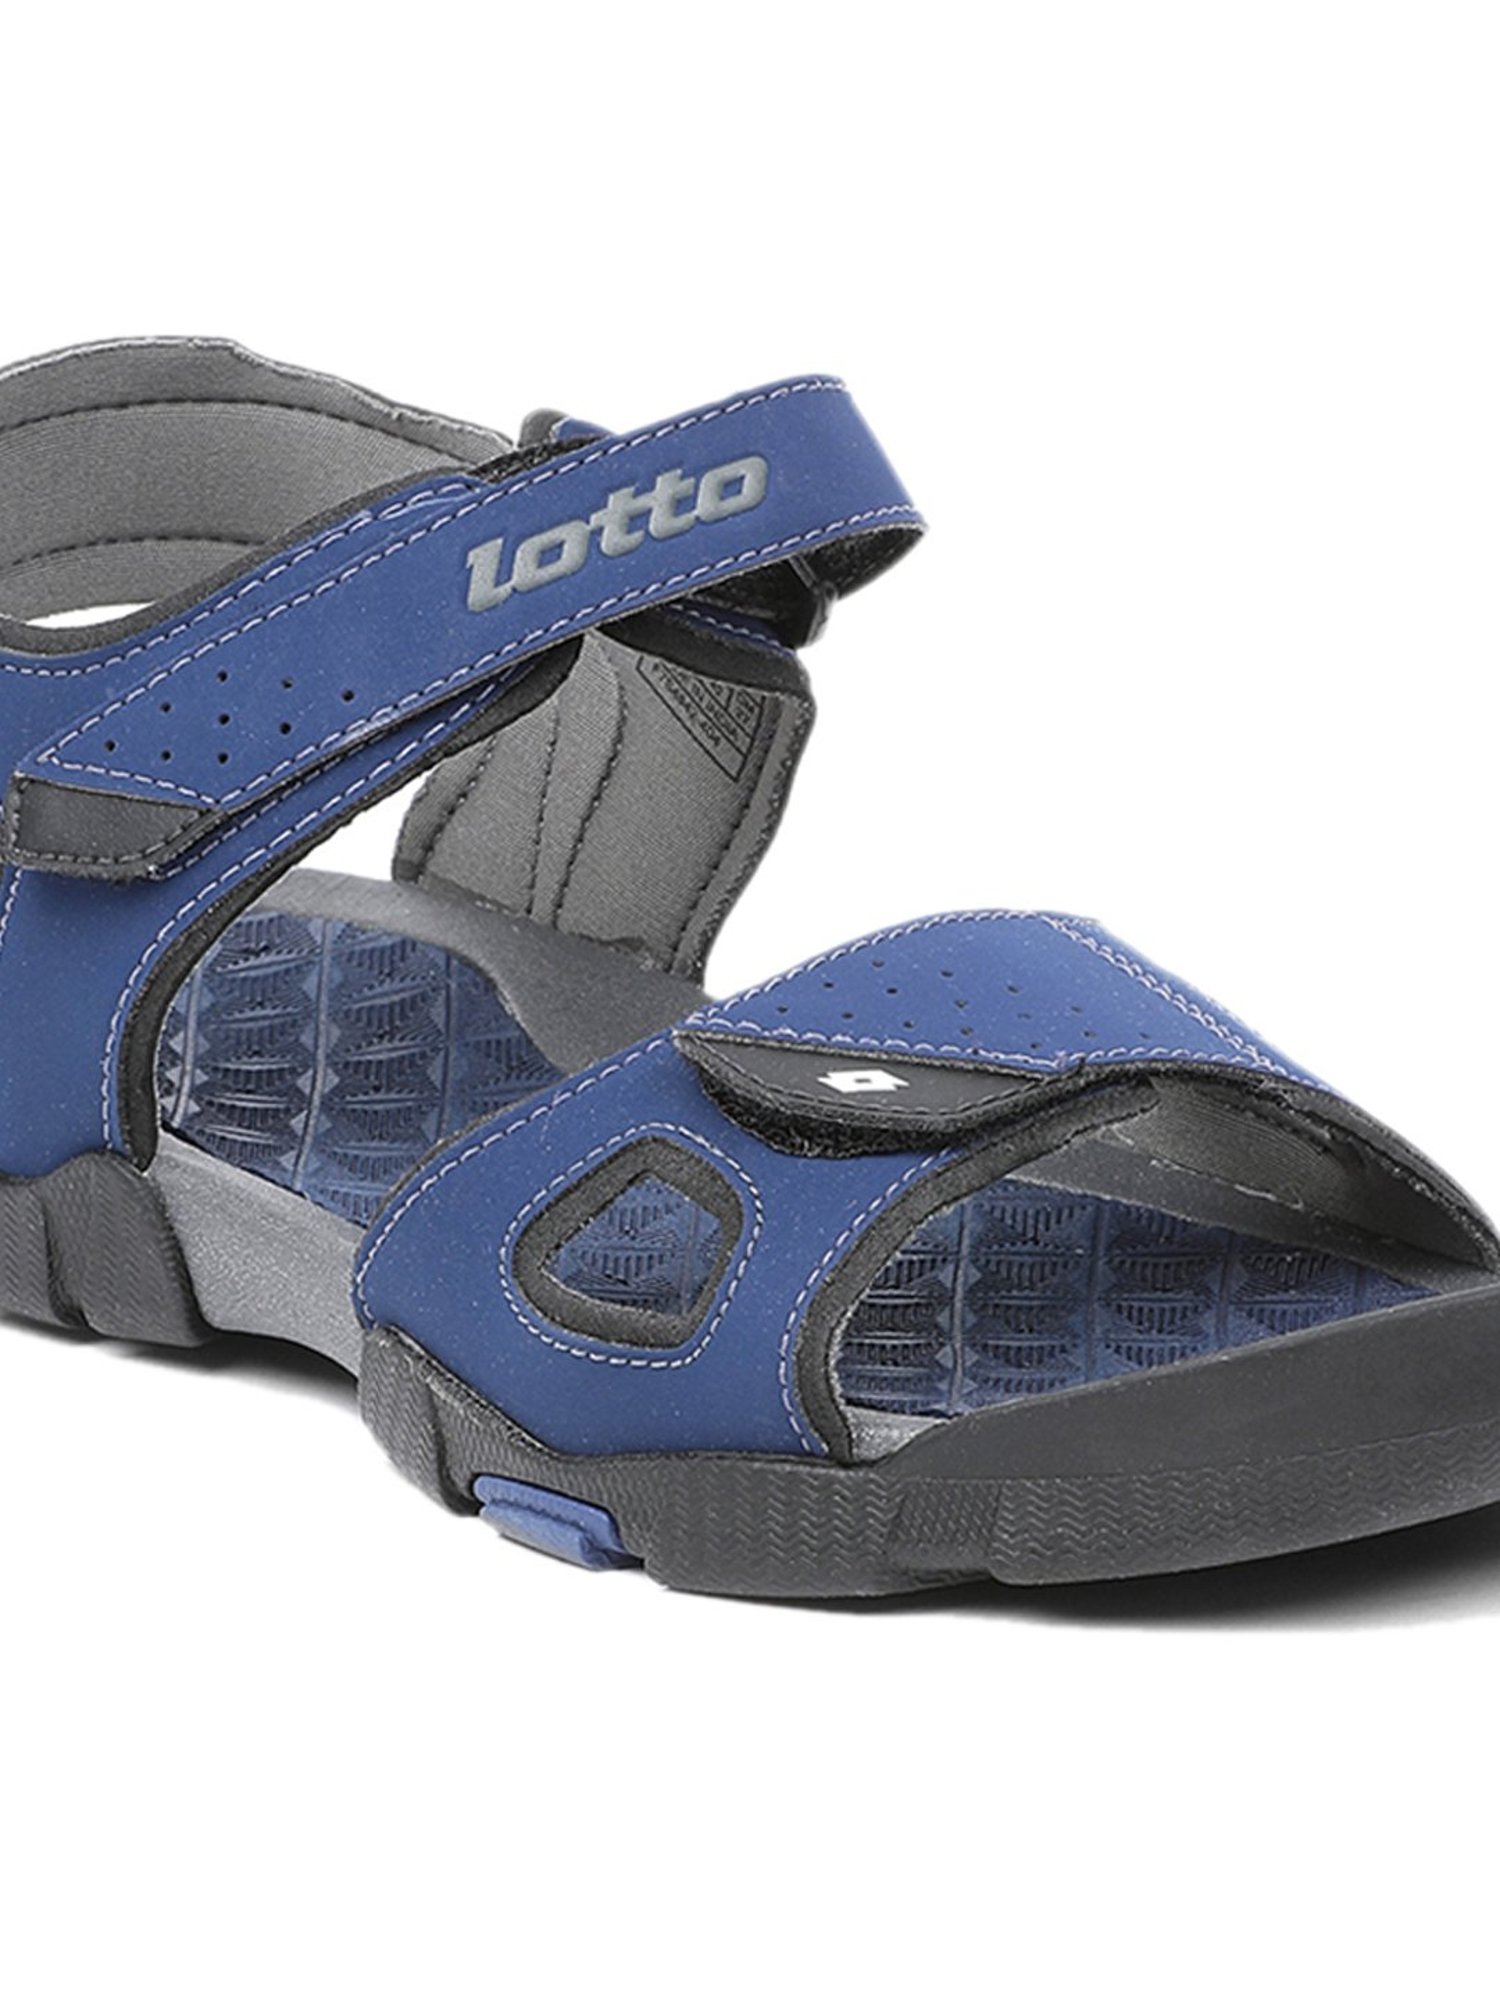 Lotto Sandal WILEY 2 with Adjustable Straps YR12220-21 | Gatti Sports  Factory Outlet - Malaysia Sportswear Online Shop